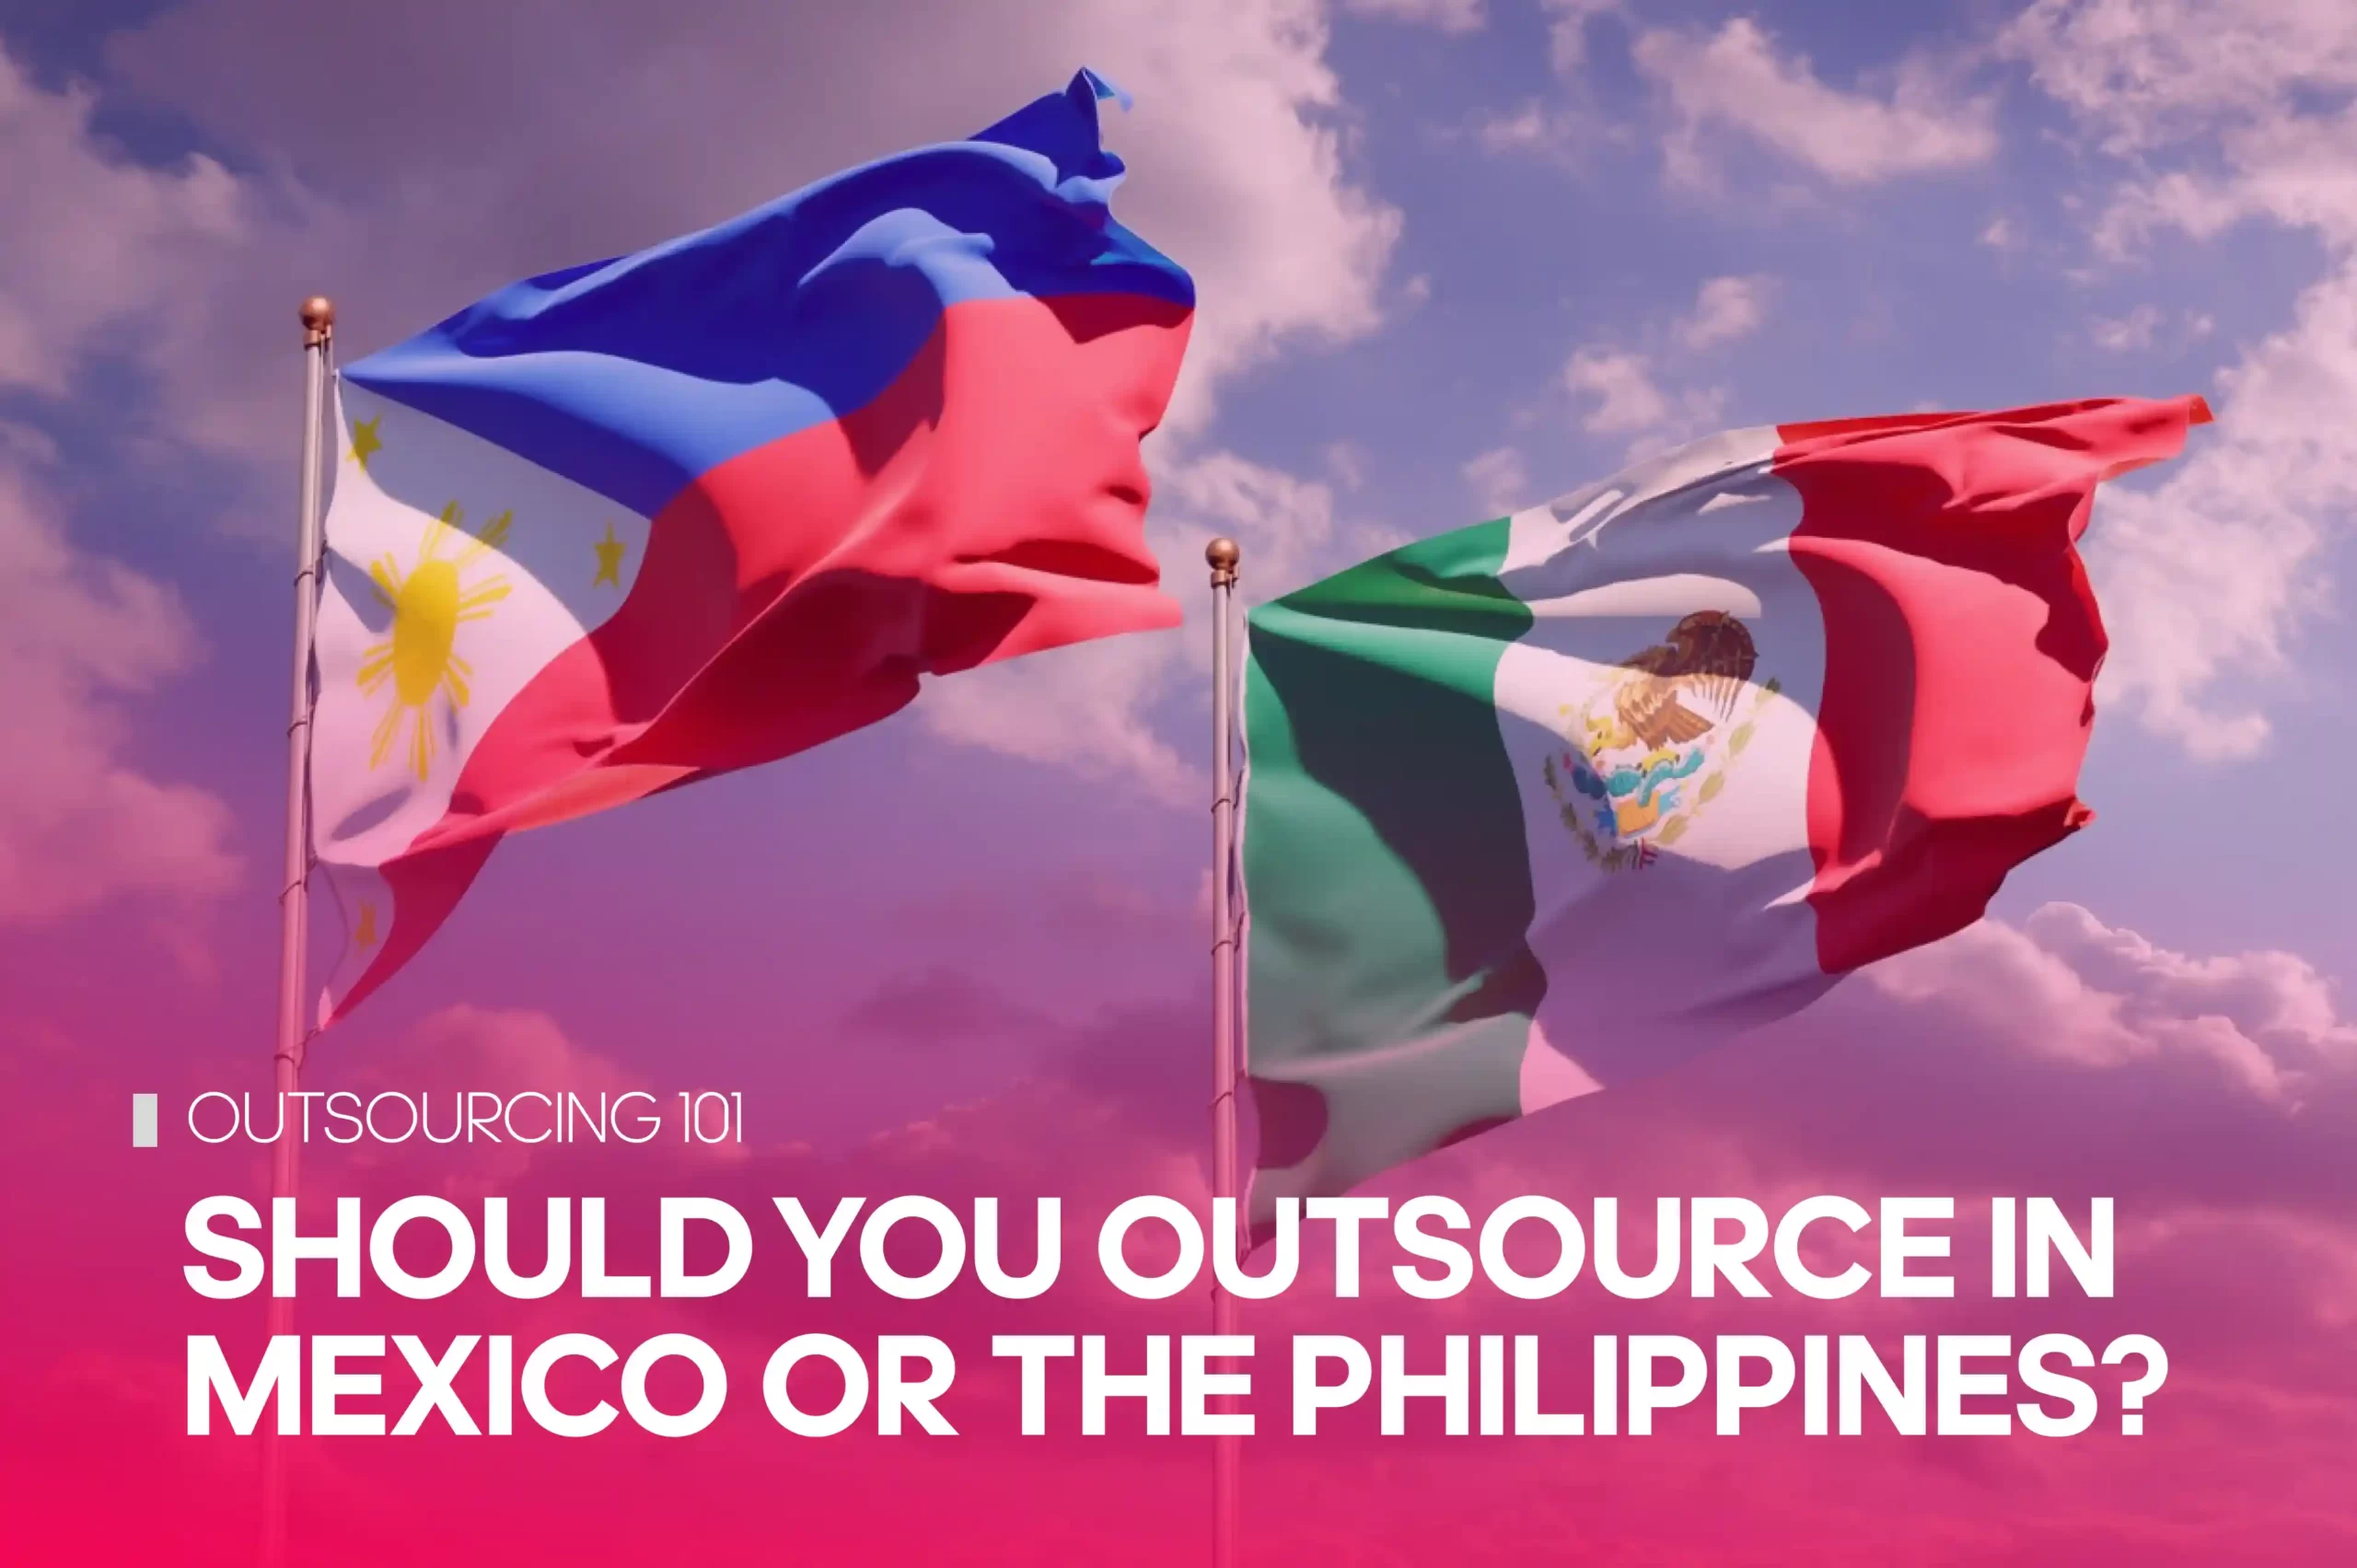 The Philippine and Mexican national flags on the top of the mast - a cover page - entitled “Would you outsource to Mexico or the Philippines?”